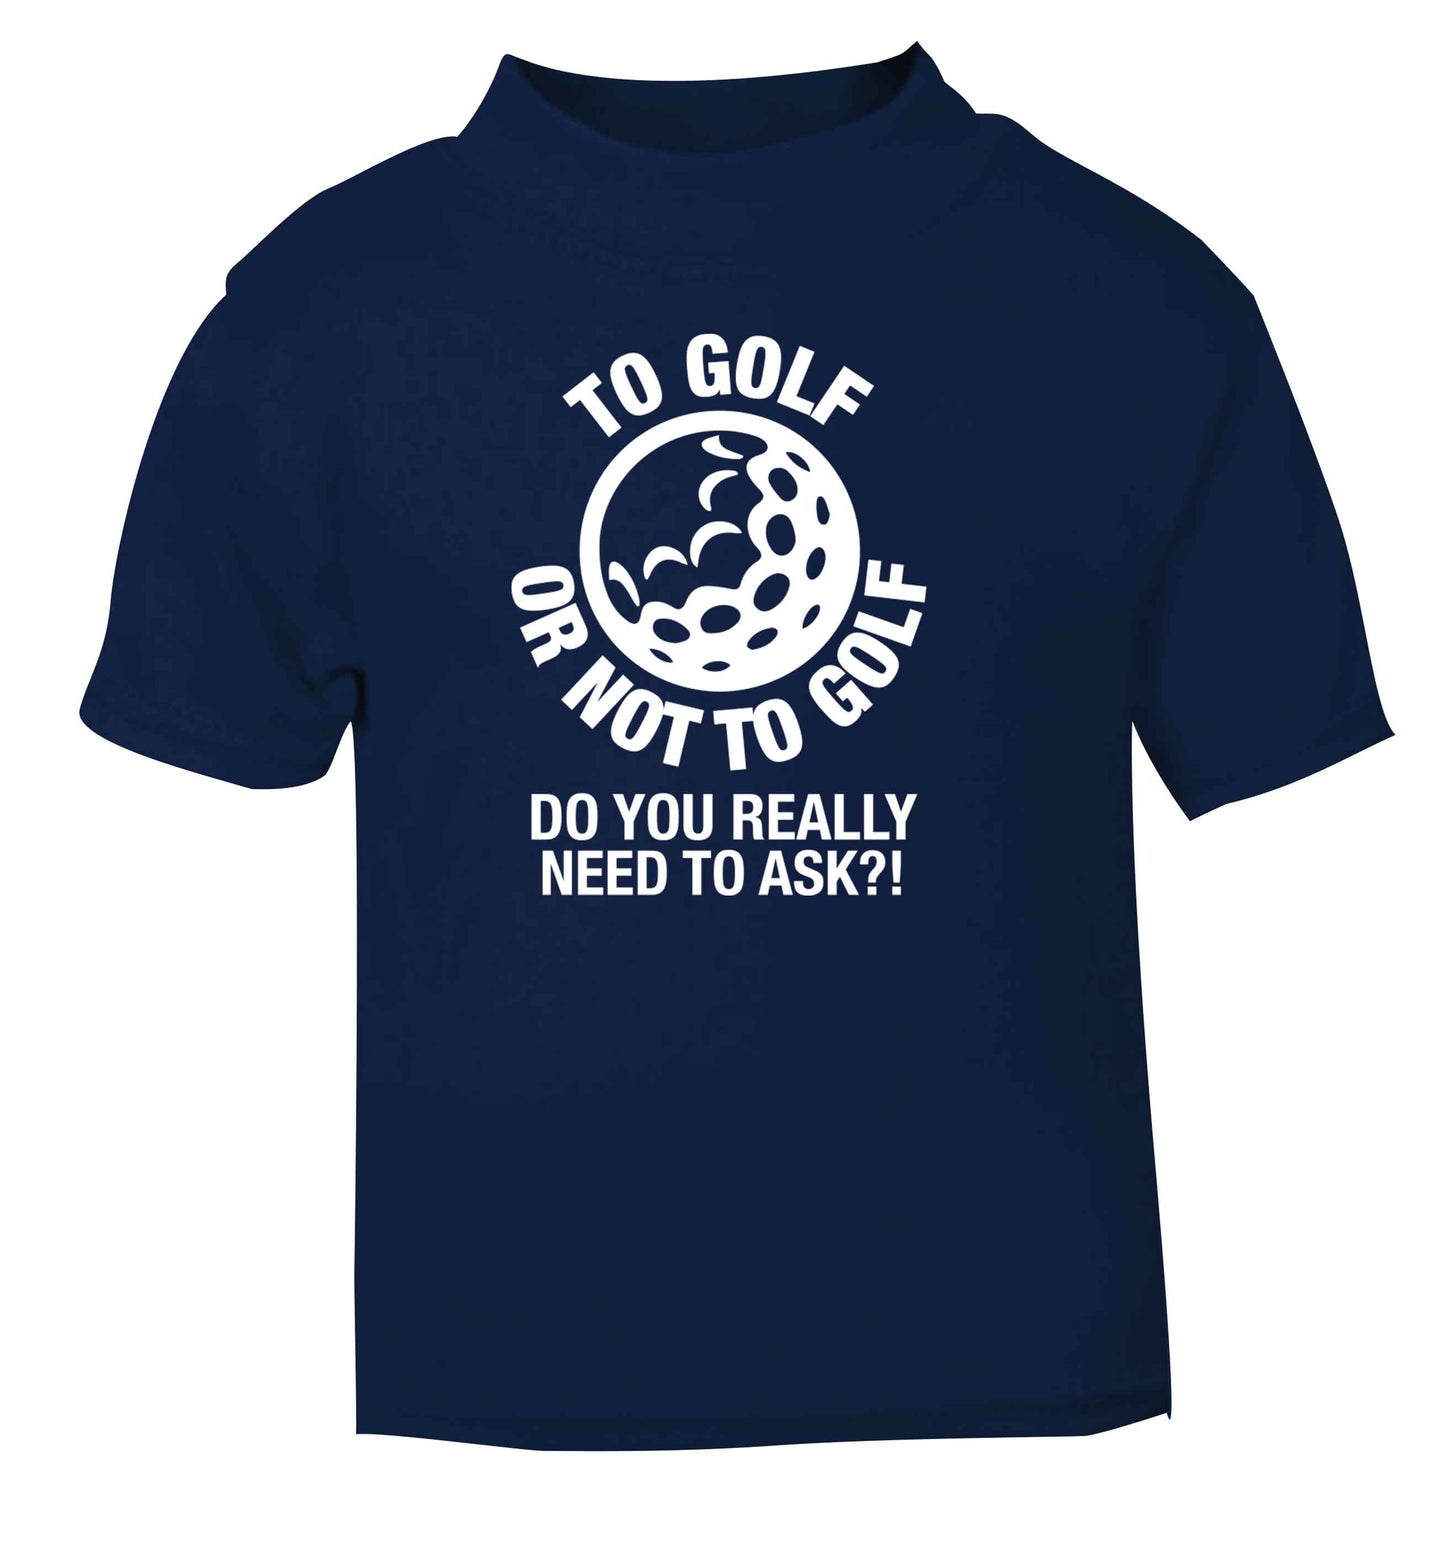 To golf or not to golf Do you really need to ask?! navy Baby Toddler Tshirt 2 Years